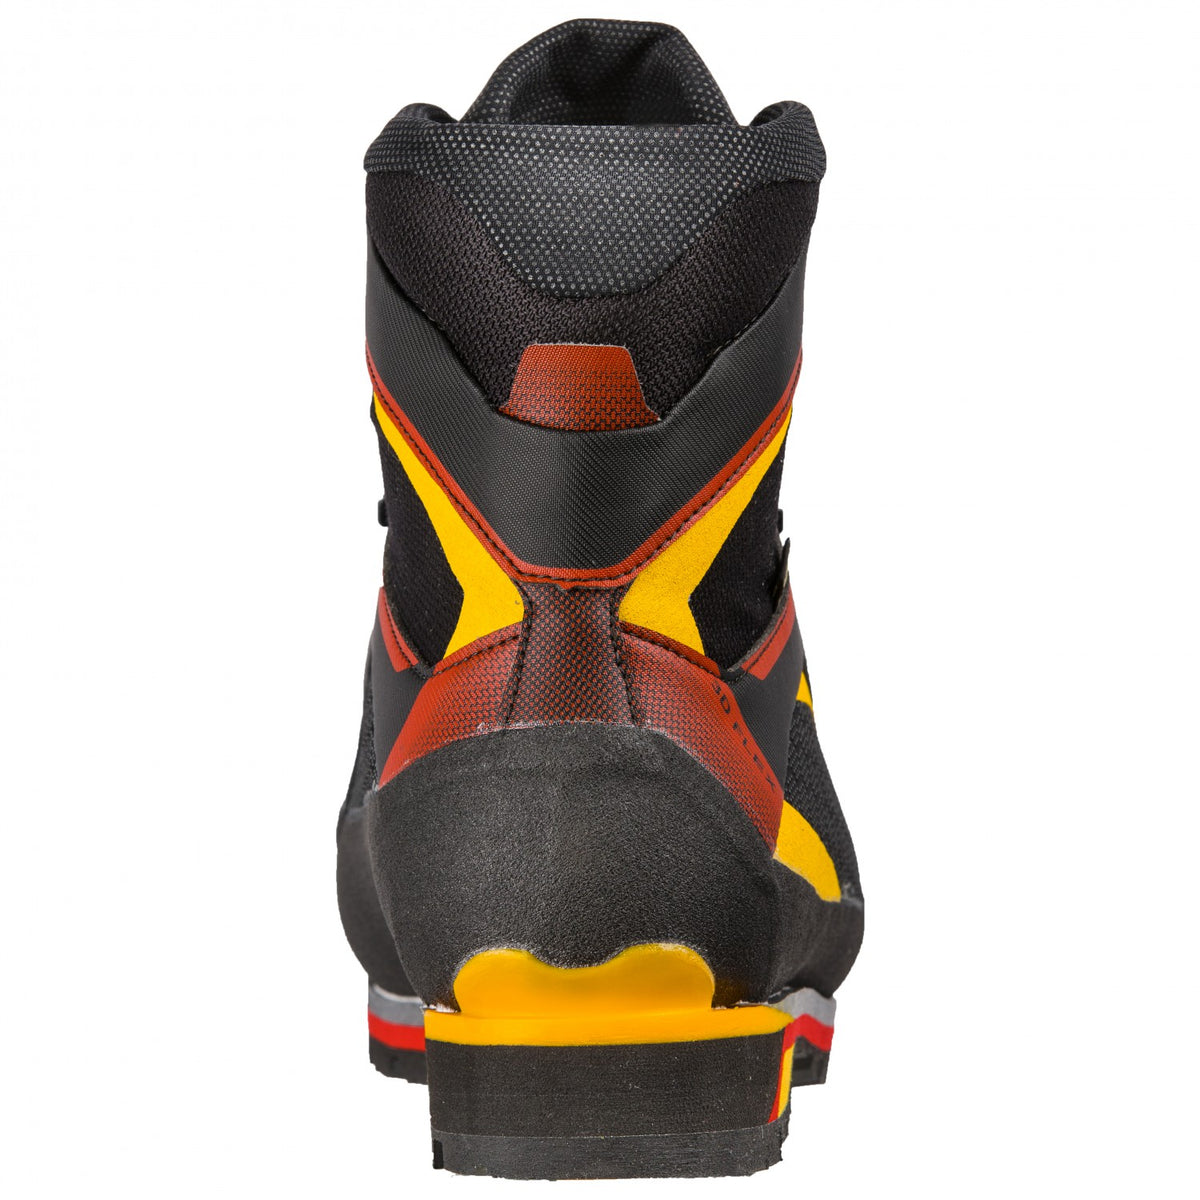 La Sportiva Trango Tower Extreme GTX mountaineering boot, view from behind of the heel